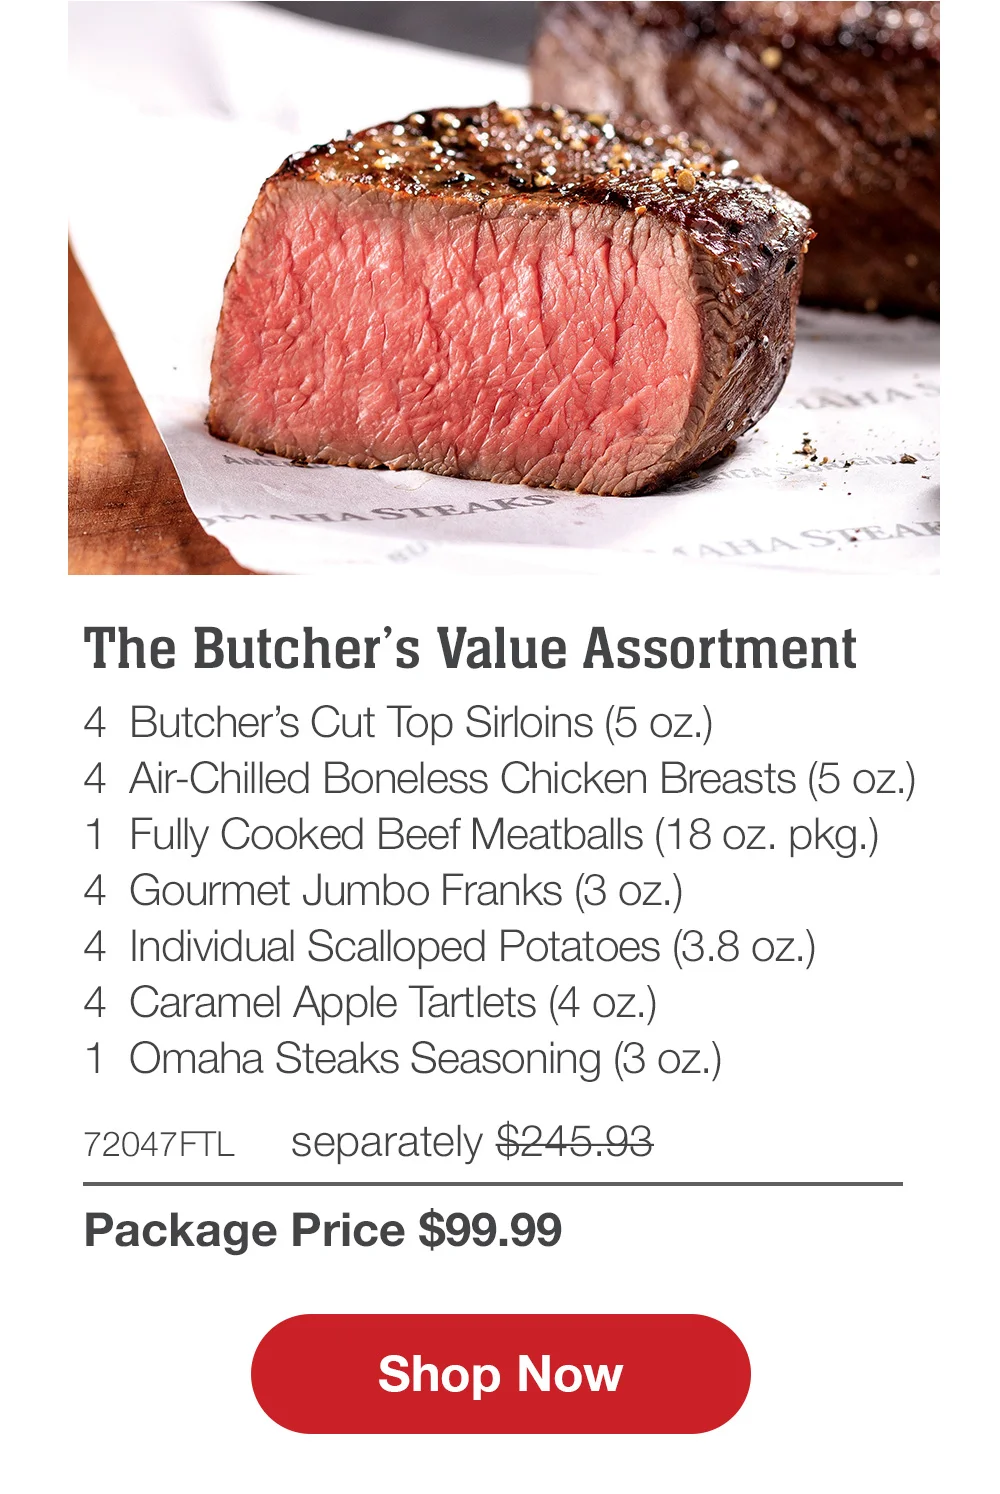 The Butcher's Value Assortment - 4 Butcher's Cut Top Sirloins (5 oz.) - 4 Air-Chilled Boneless Chicken Breasts (5 oz.) - 1 Fully Cooked Beef Meatballs (18 oz. pkg.) - 4 Gourmet Jumbo Franks (3 oz.) - 4 Individual Scalloped Potatoes (3.8 oz.) - 4 Caramel Apple Tartlets (4 oz.) - 1 Omaha Steaks Seasoning (3 oz.) - 72047FTL separately \\$245.93 | Package Price \\$99.99 || Shop Now